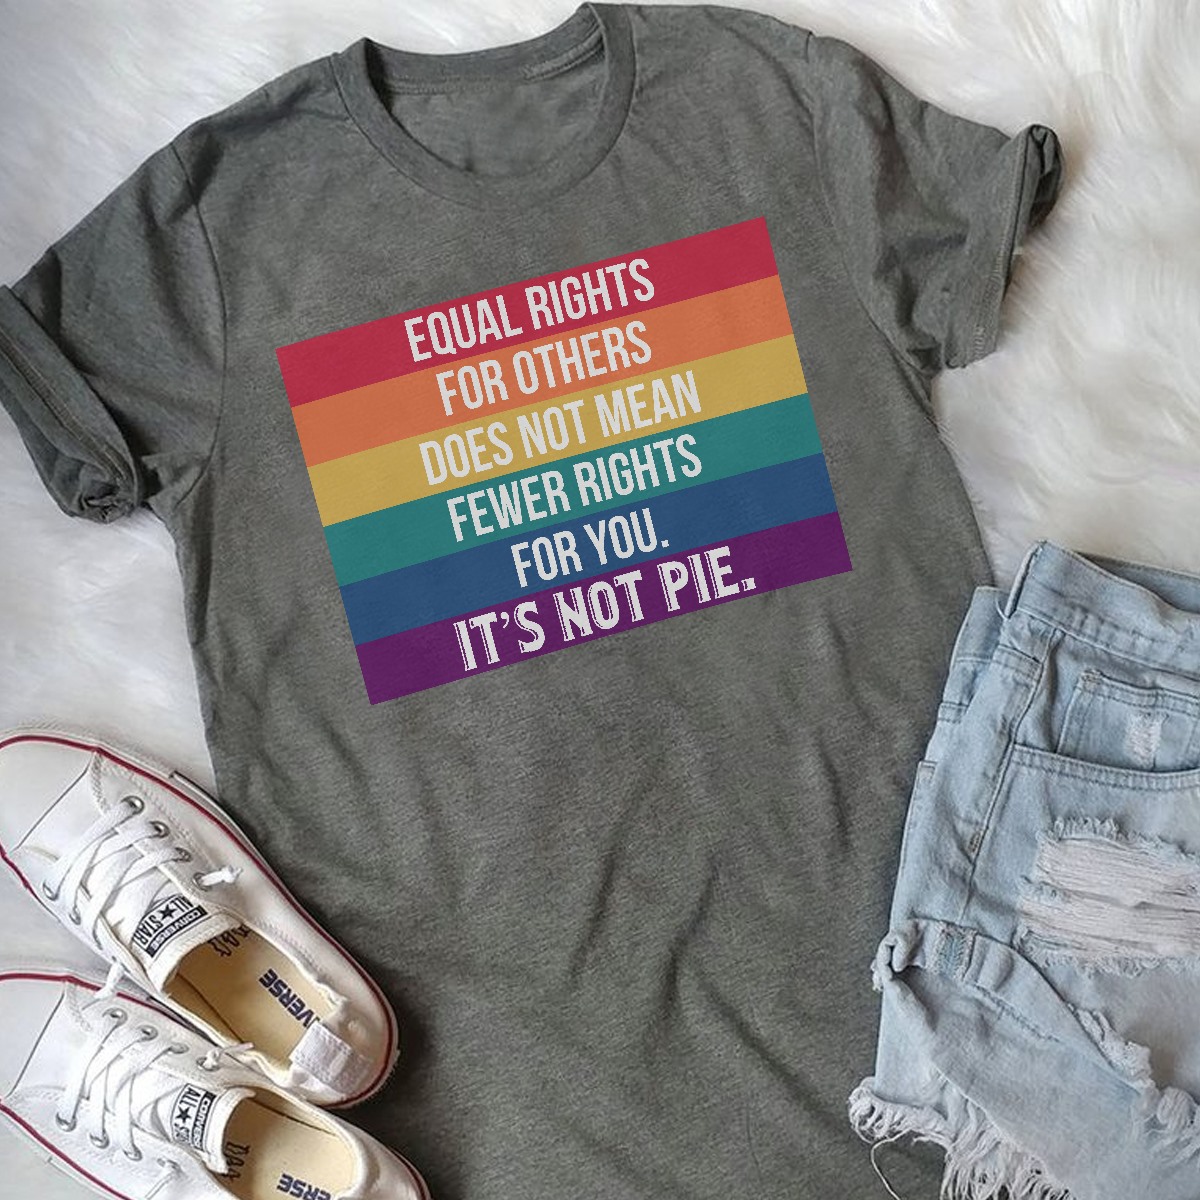 Equal rights for others does not mean fewer rights for you, it's not pie - Lgbt community